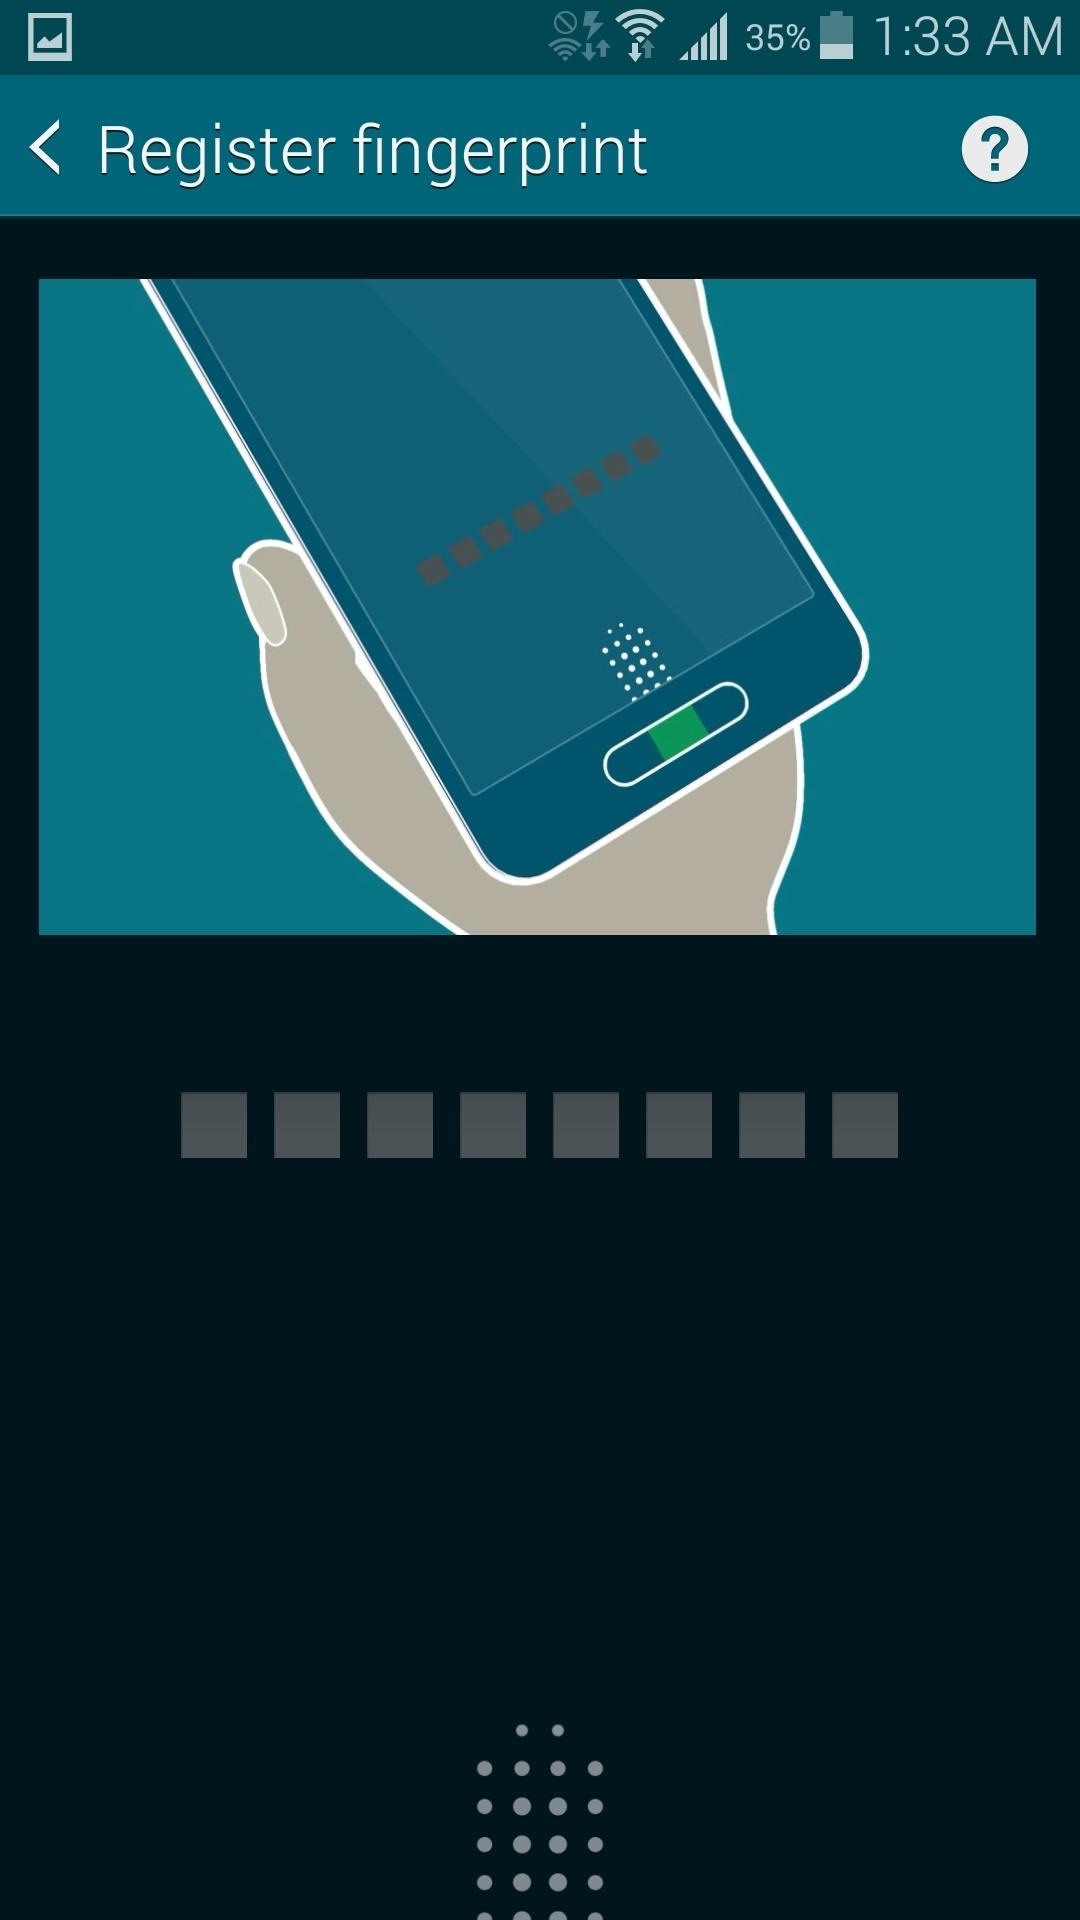 How to Unlock Your Fingerprint-Protected Galaxy S5 Using Only One Hand